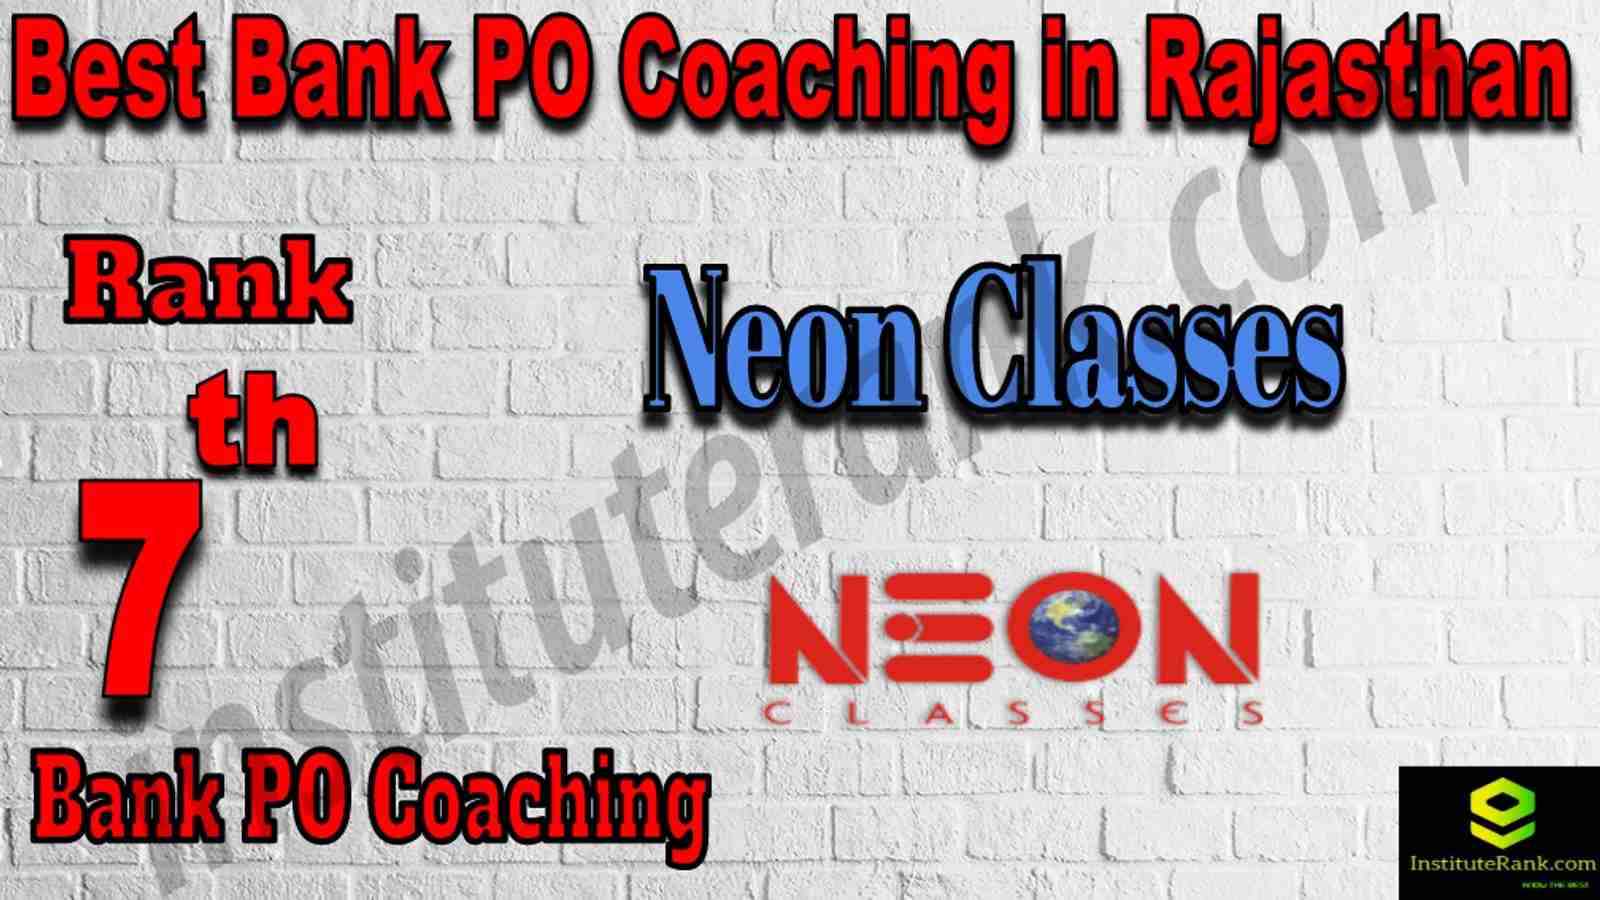 7th Best Bank PO Coaching in Rajasthan